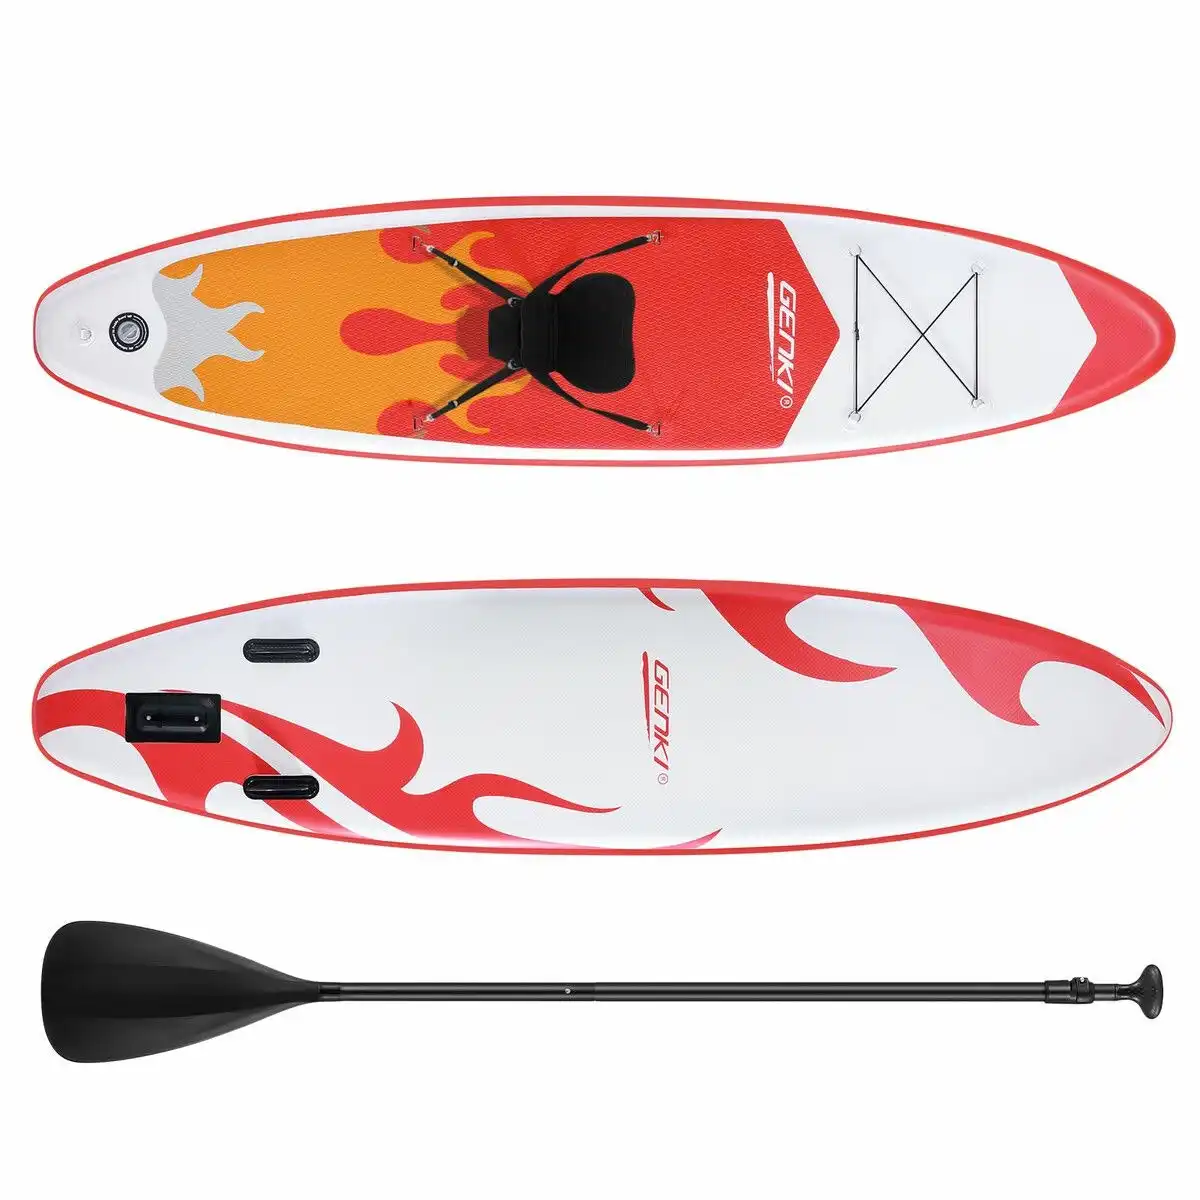 Genki SUP Kayak Inflatable Stand Up Paddle Surfing Board Blow Foam Surfboard  2 In 1 with Seat Red